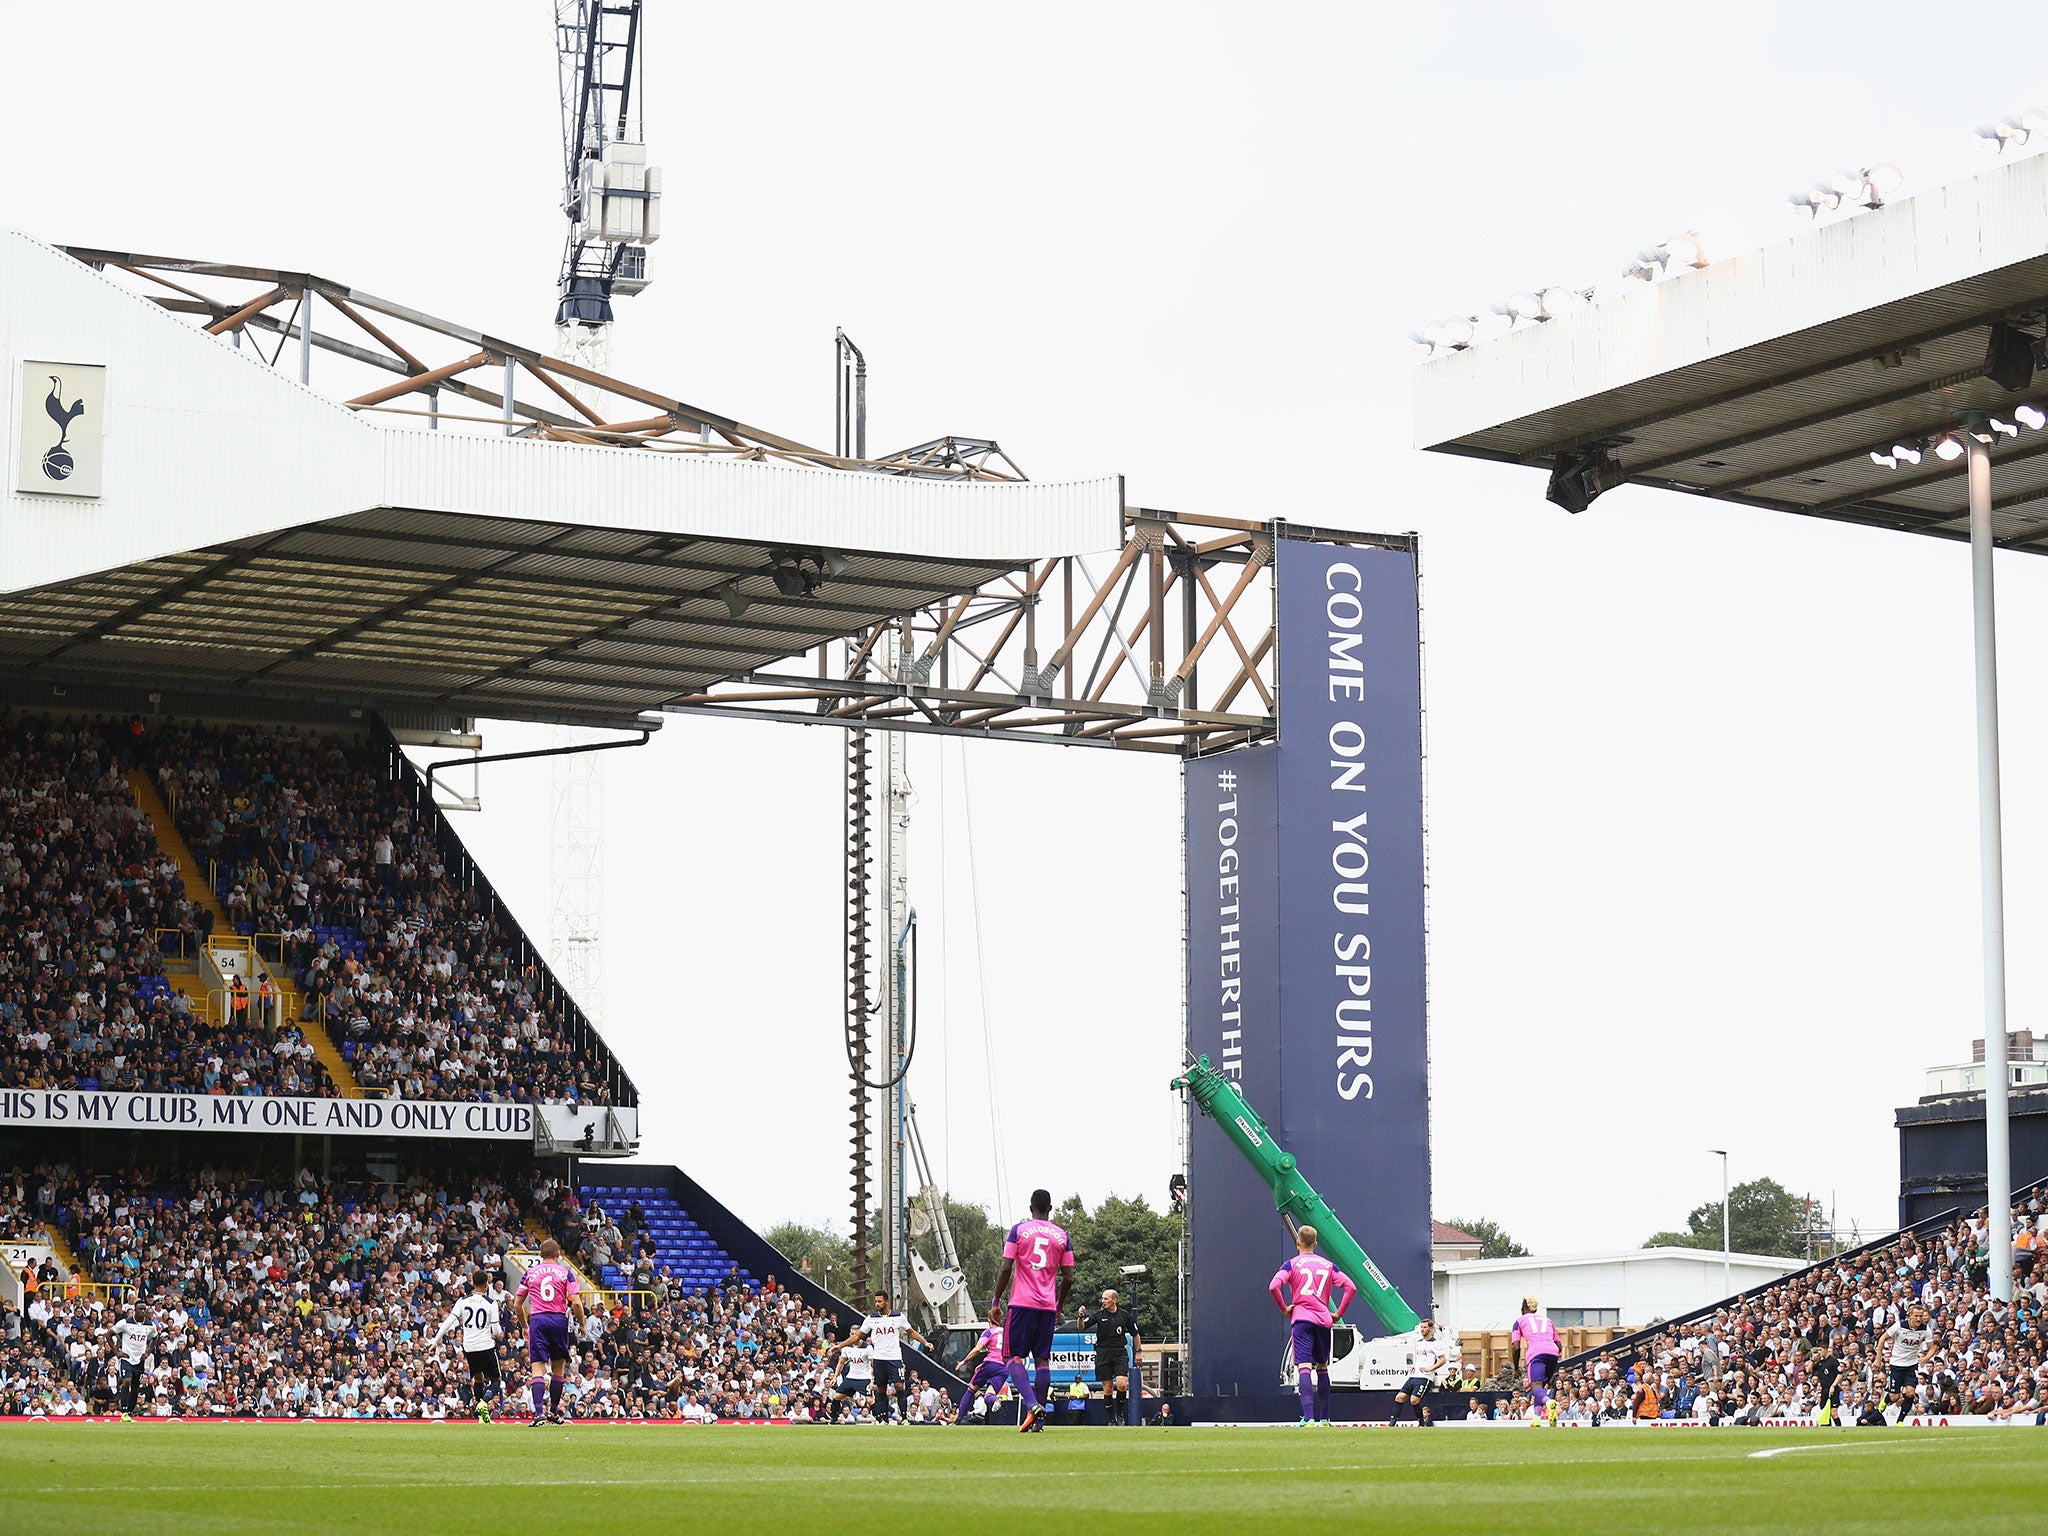 The ongoing stadium developments can be seen from the pitch at White Hart Lane